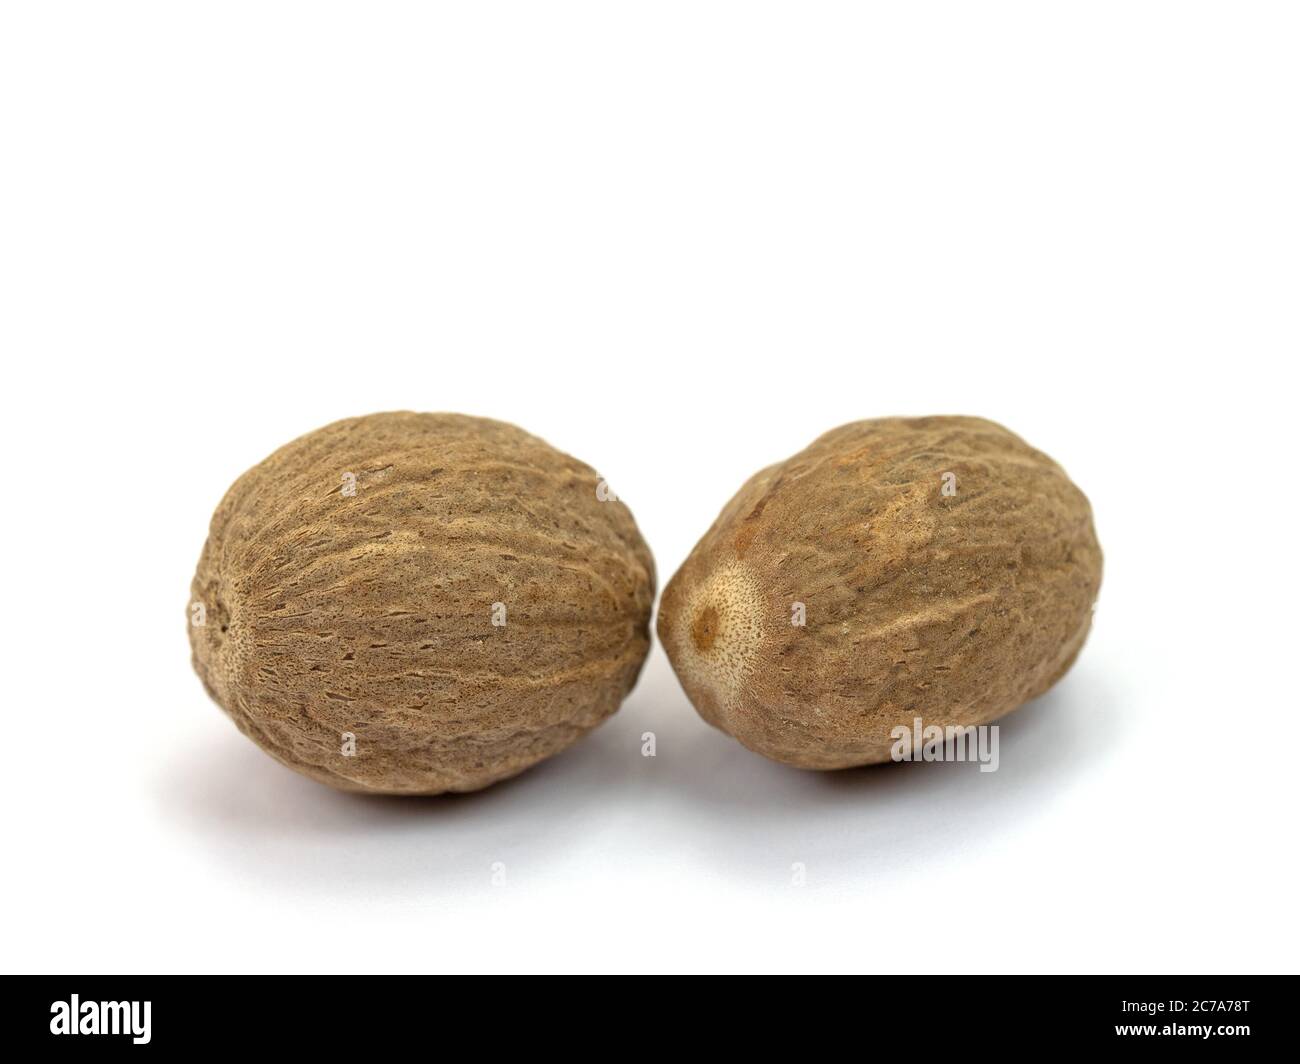 Nutmegs isolated against a white background Stock Photo